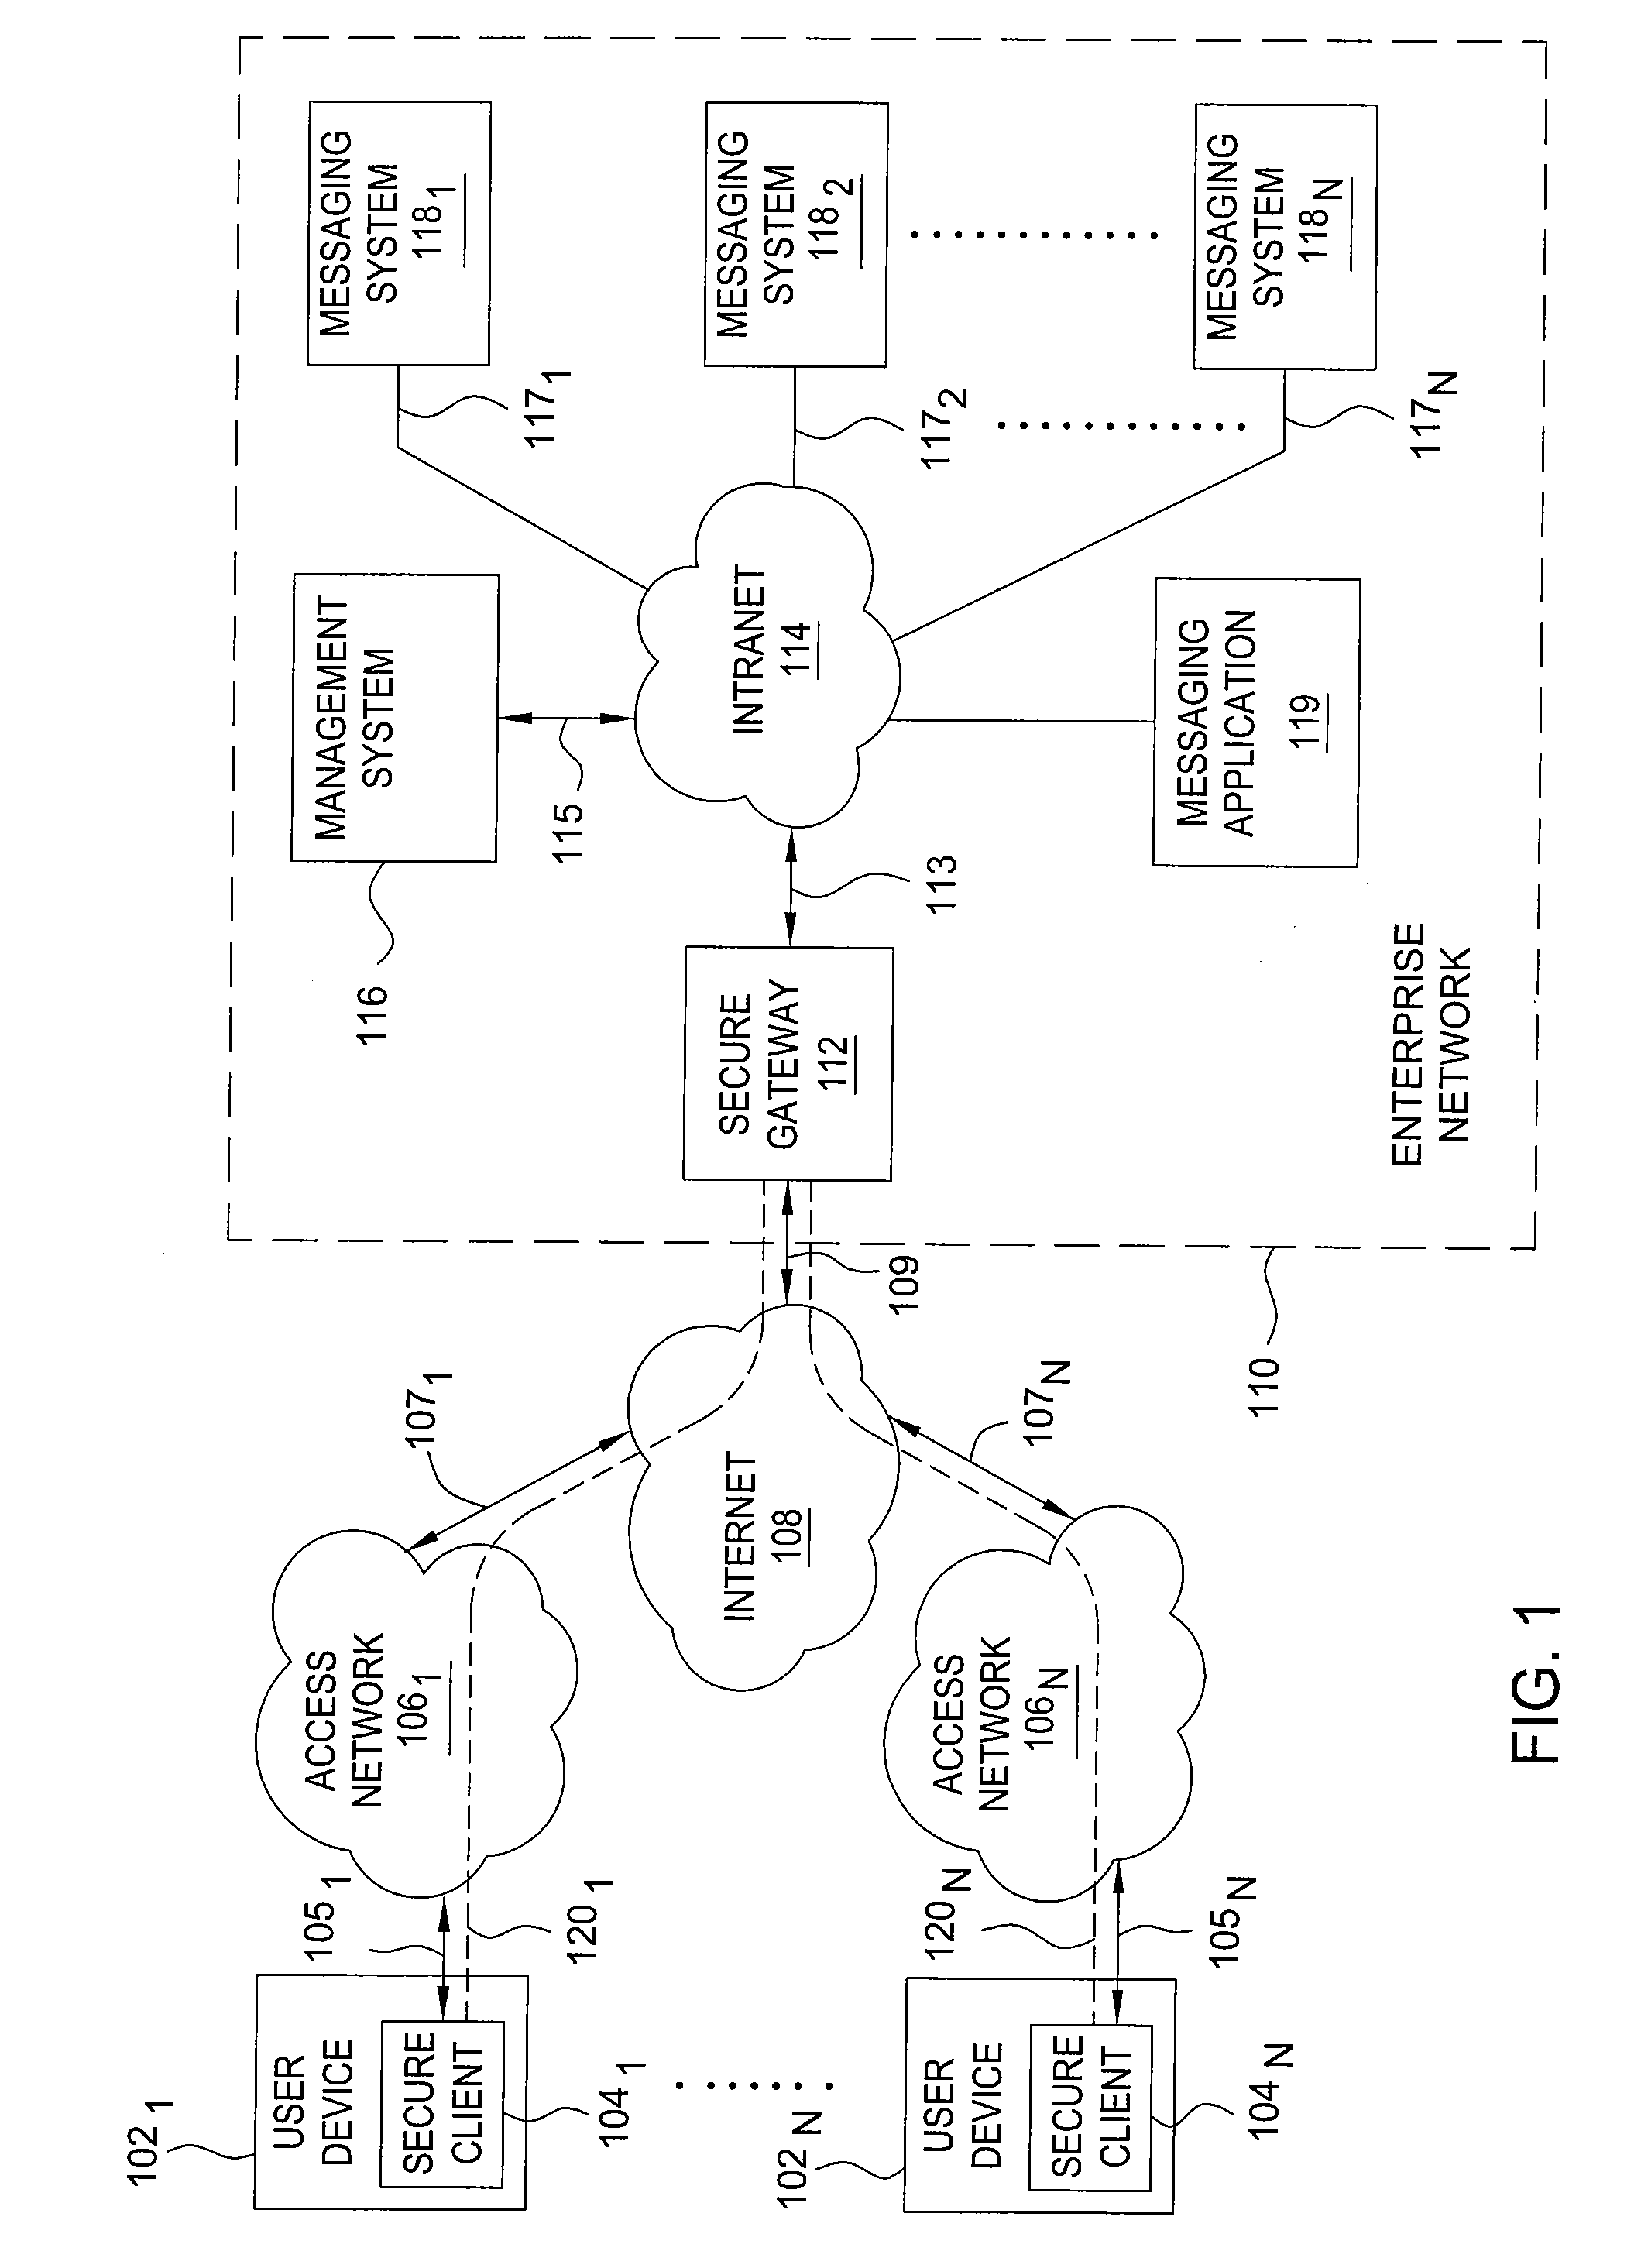 Method and apparatus for notification and delivery of messages to mobile PC users